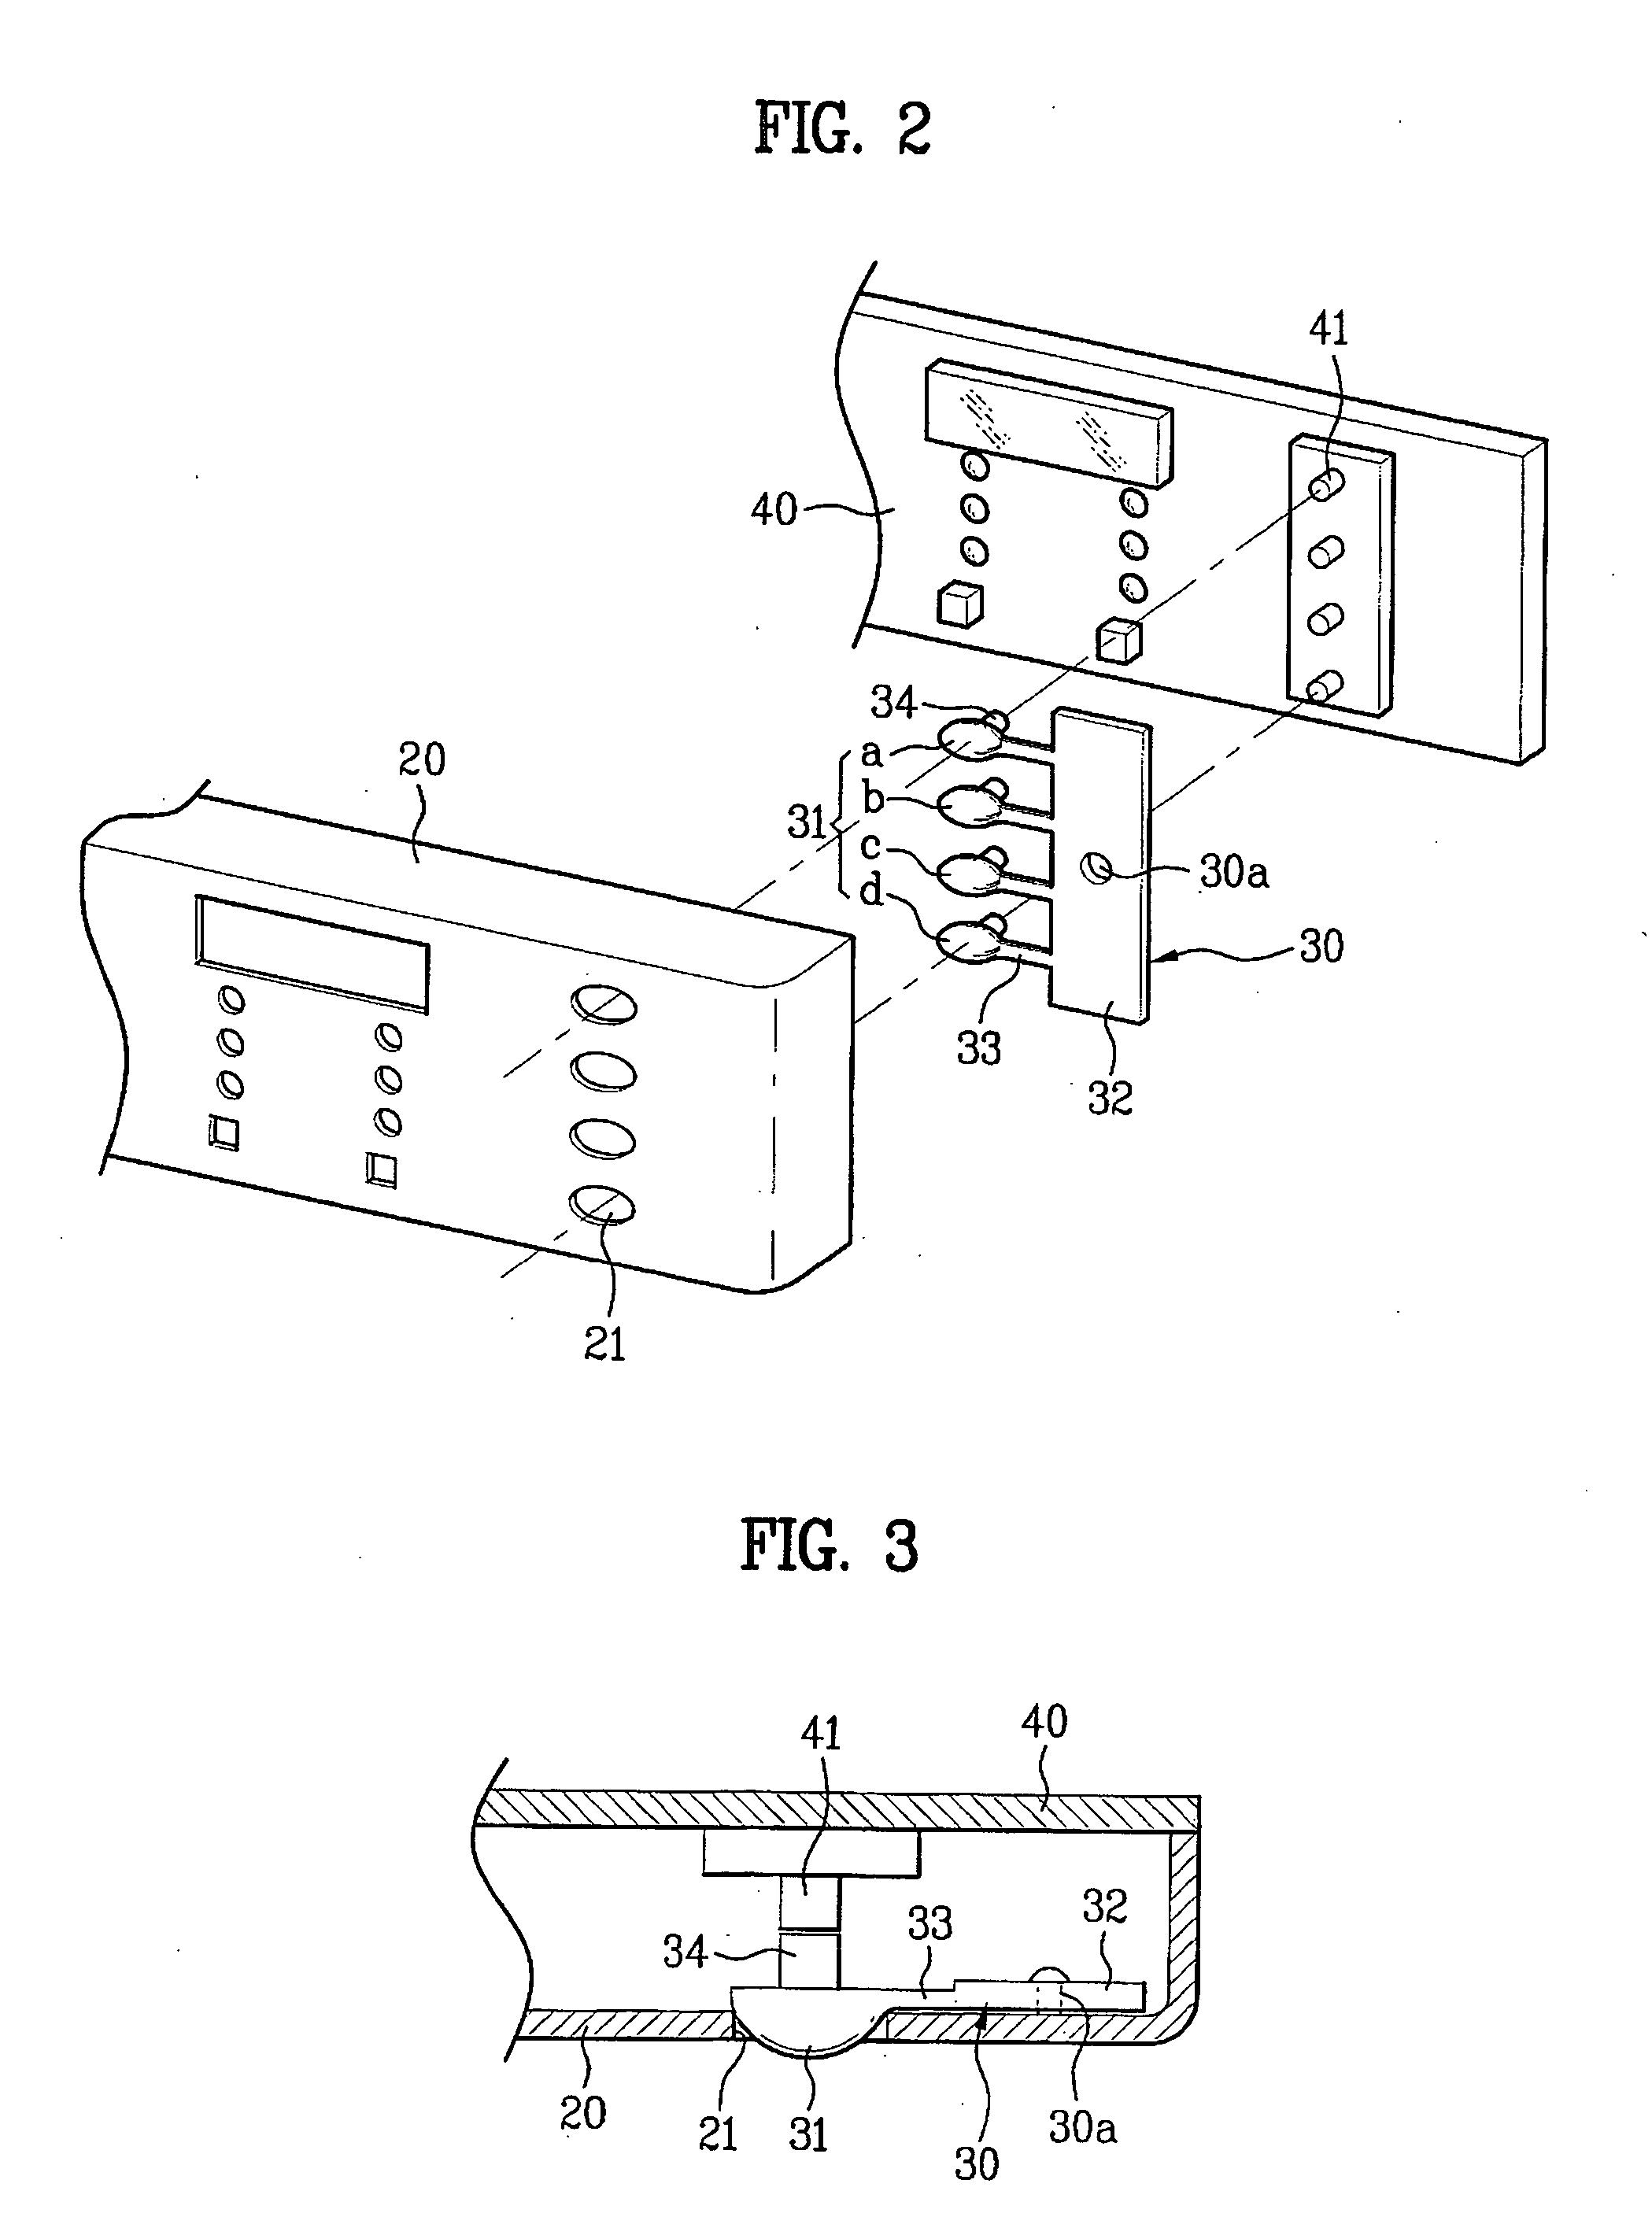 Button assembly of control panel assembly